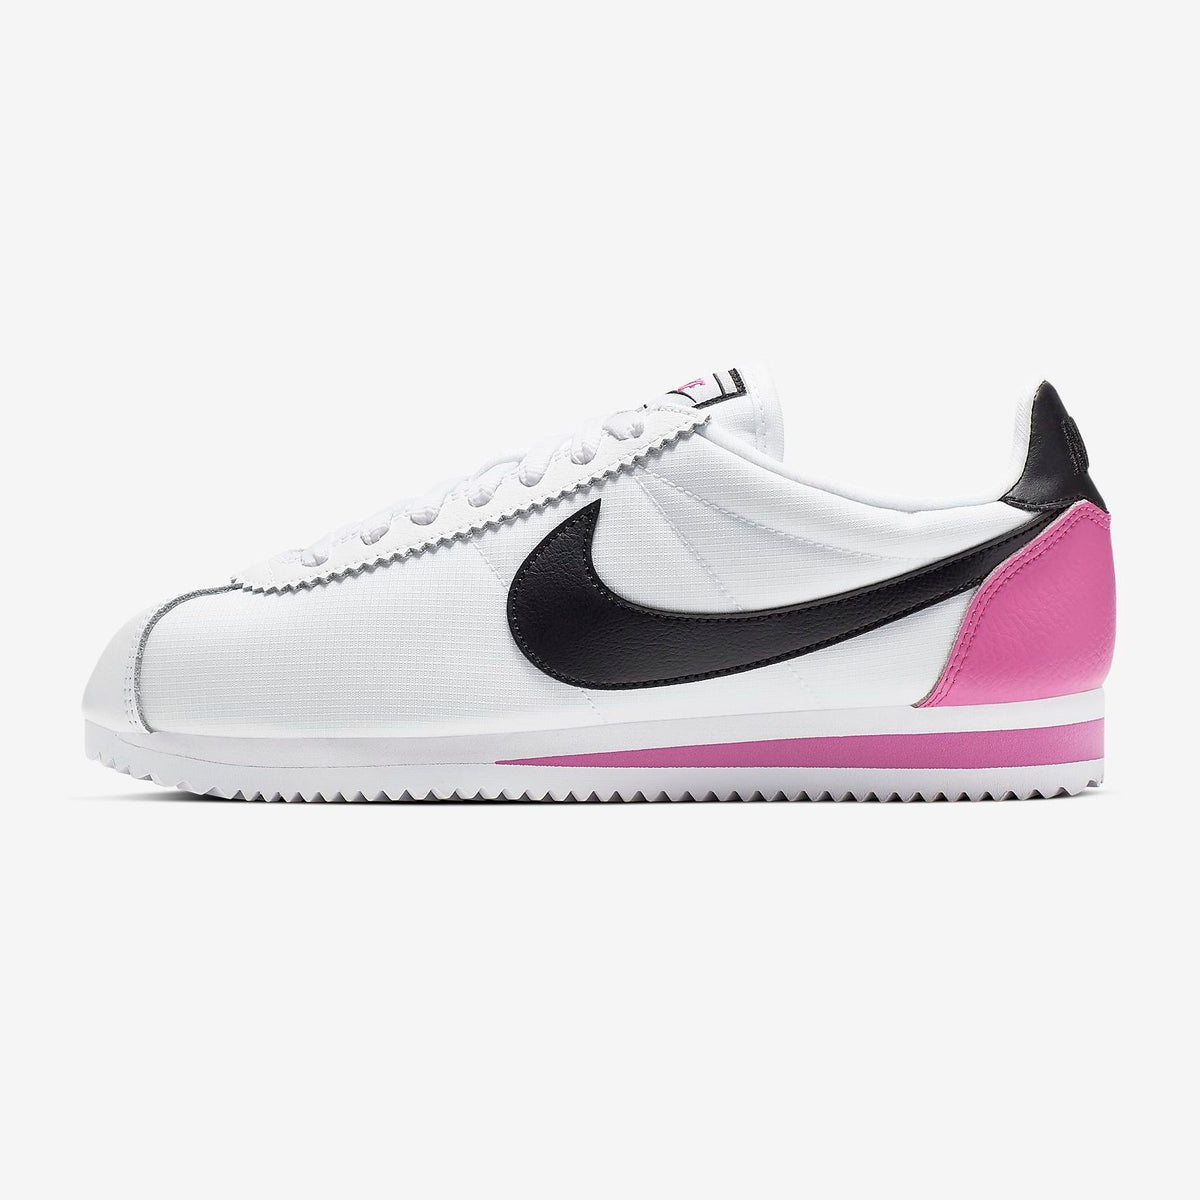 nike cortez white and rose gold